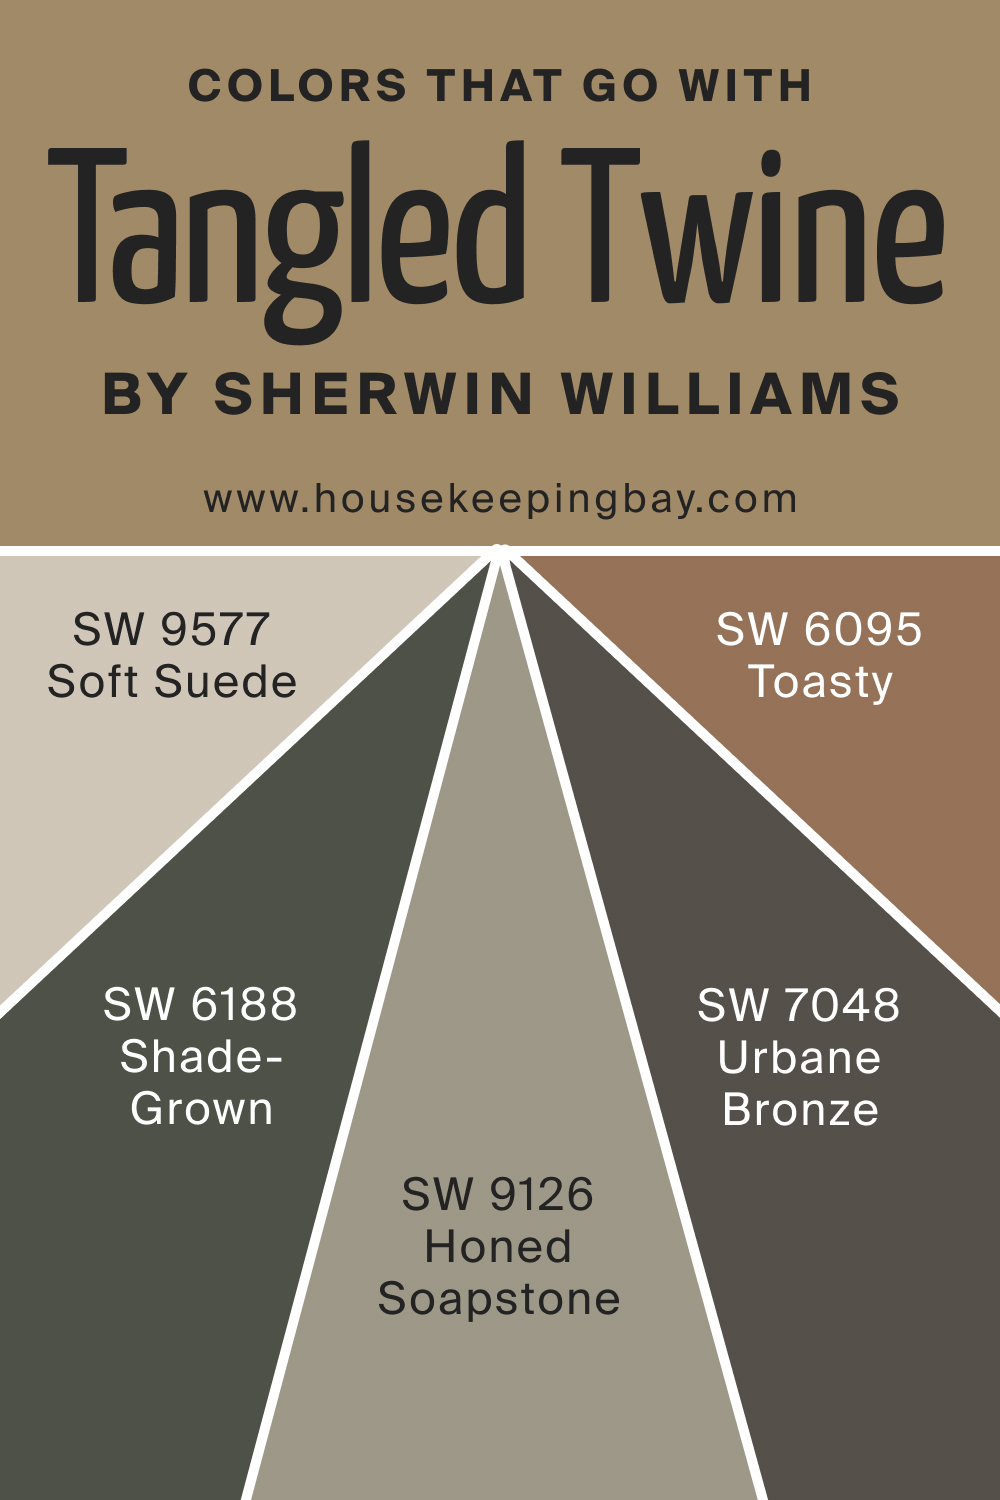 Colors that goes with SW 9538 Tangled Twine by Sherwin Williams